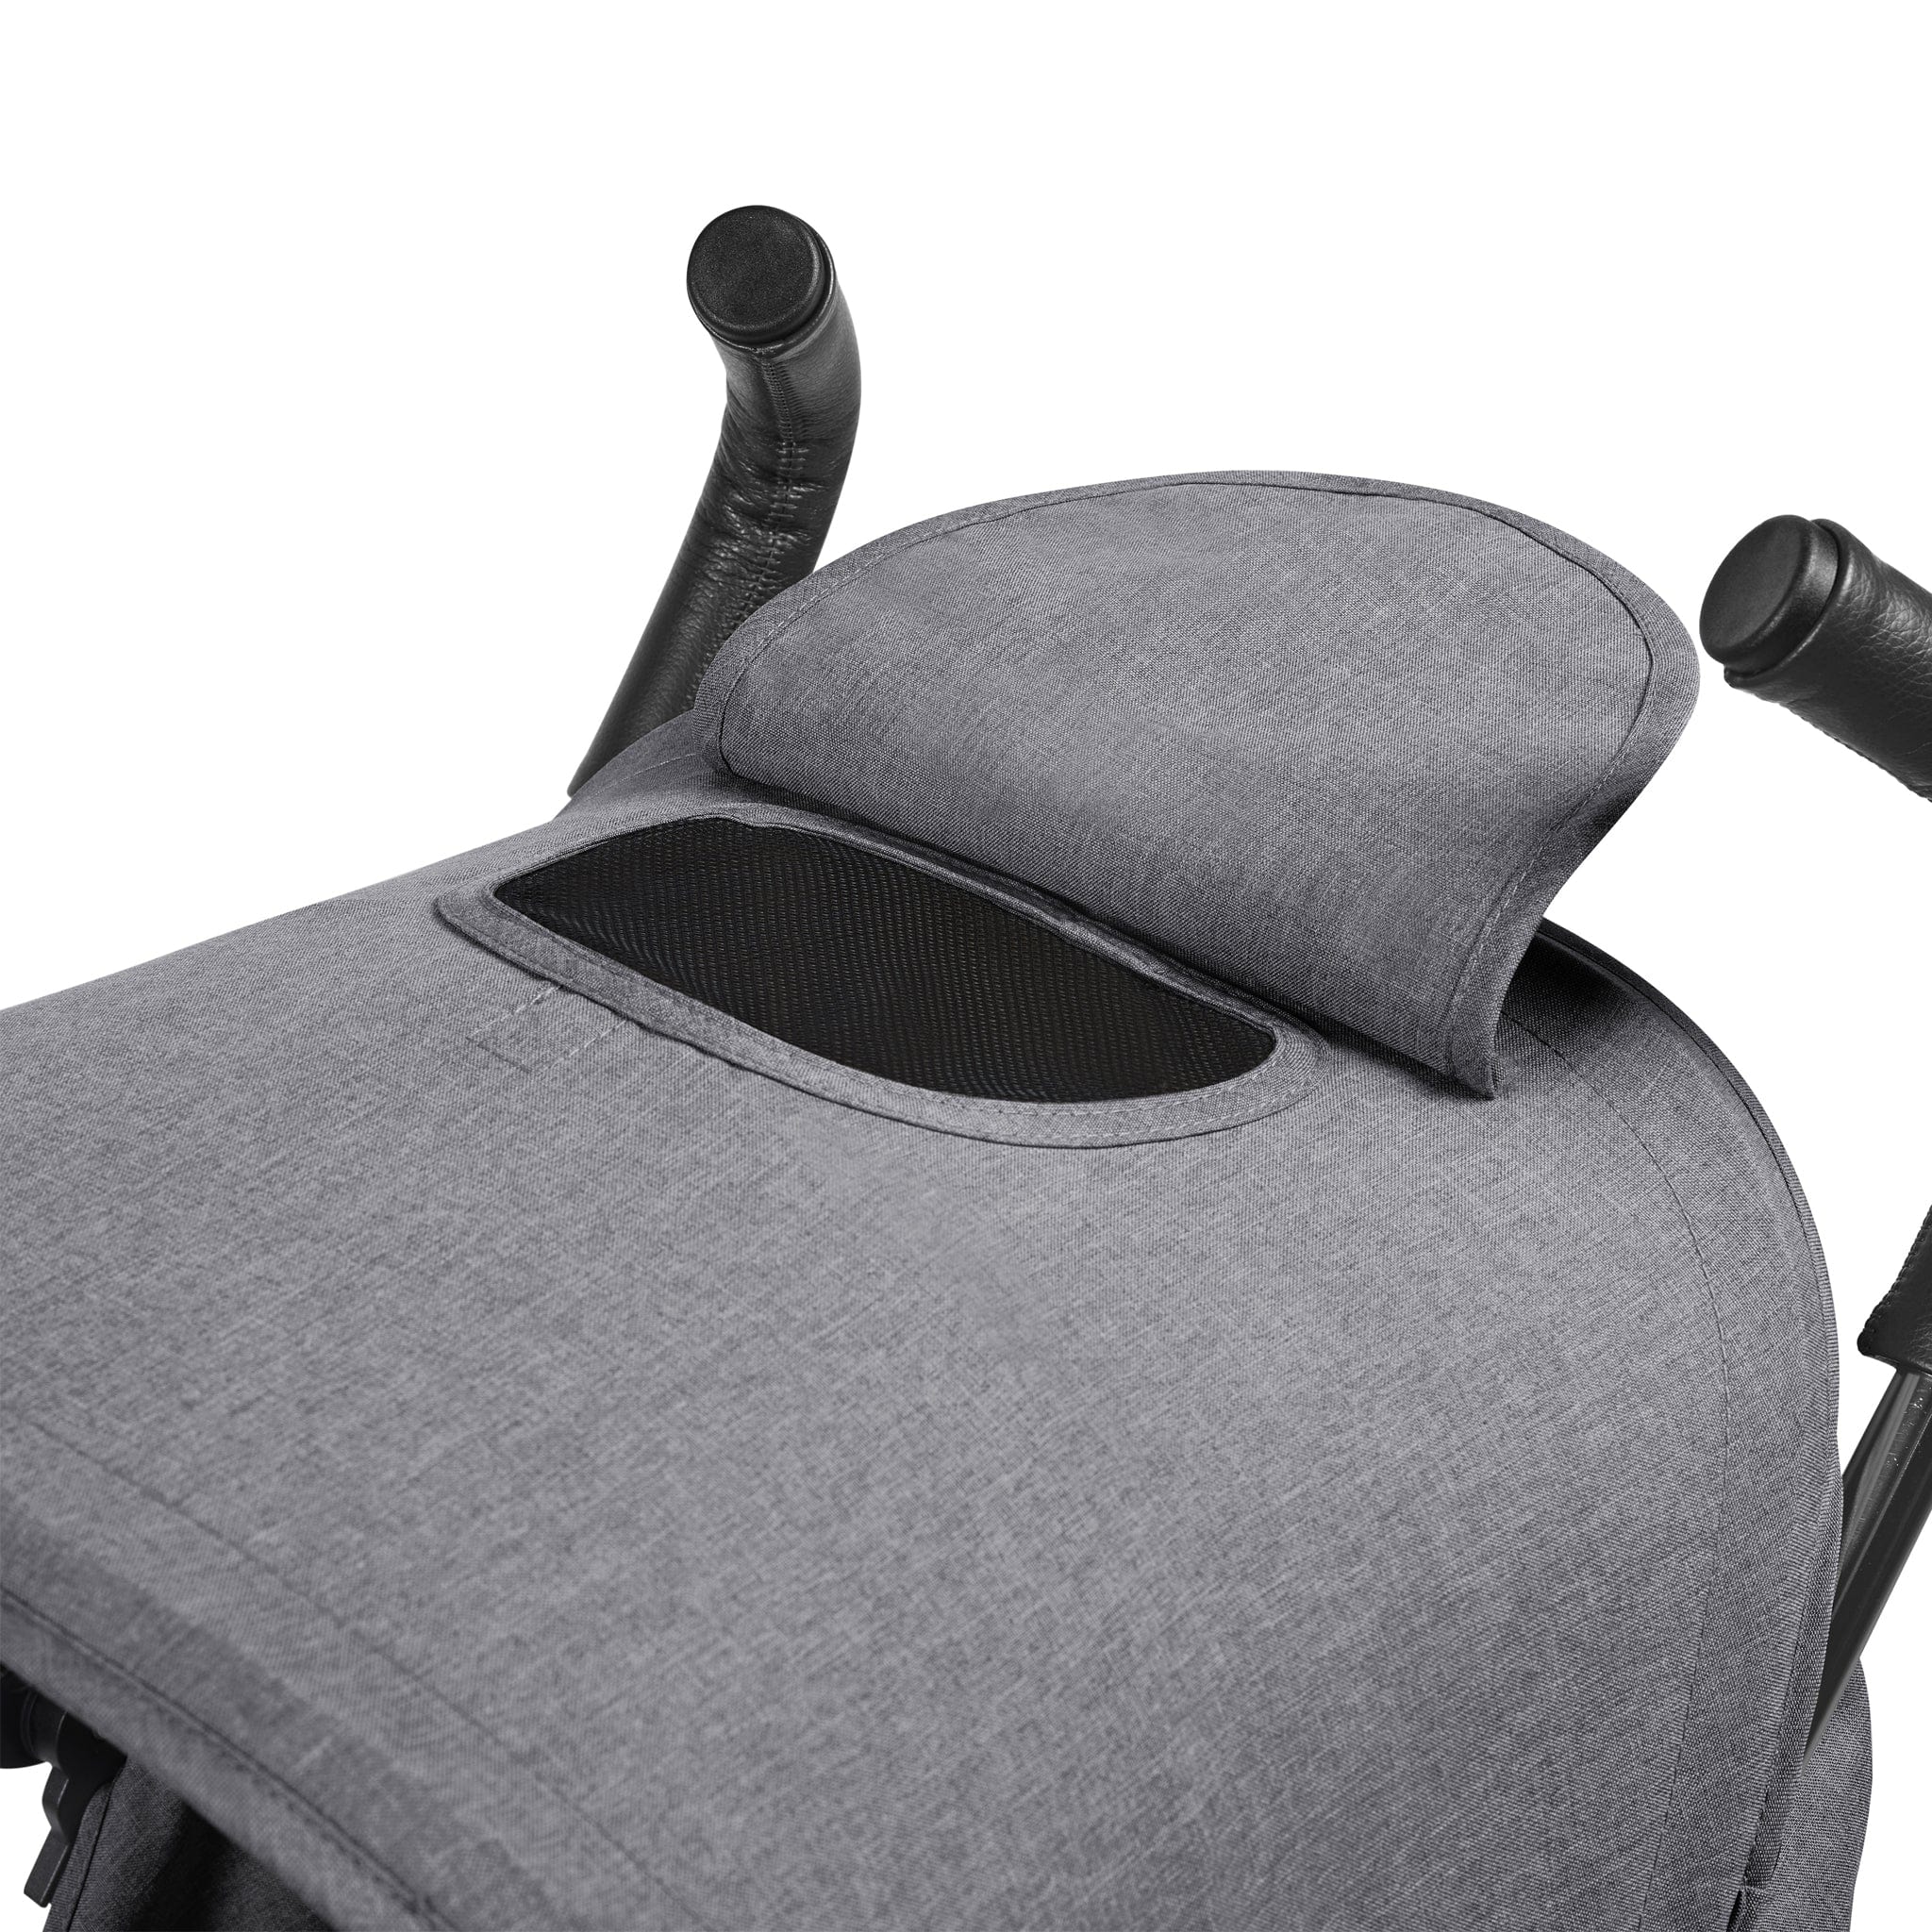 Ickle Bubba baby pushchairs Ickle Bubba Discovery Max Pushchair Graphite Grey/Matt Black 15-002-200-120